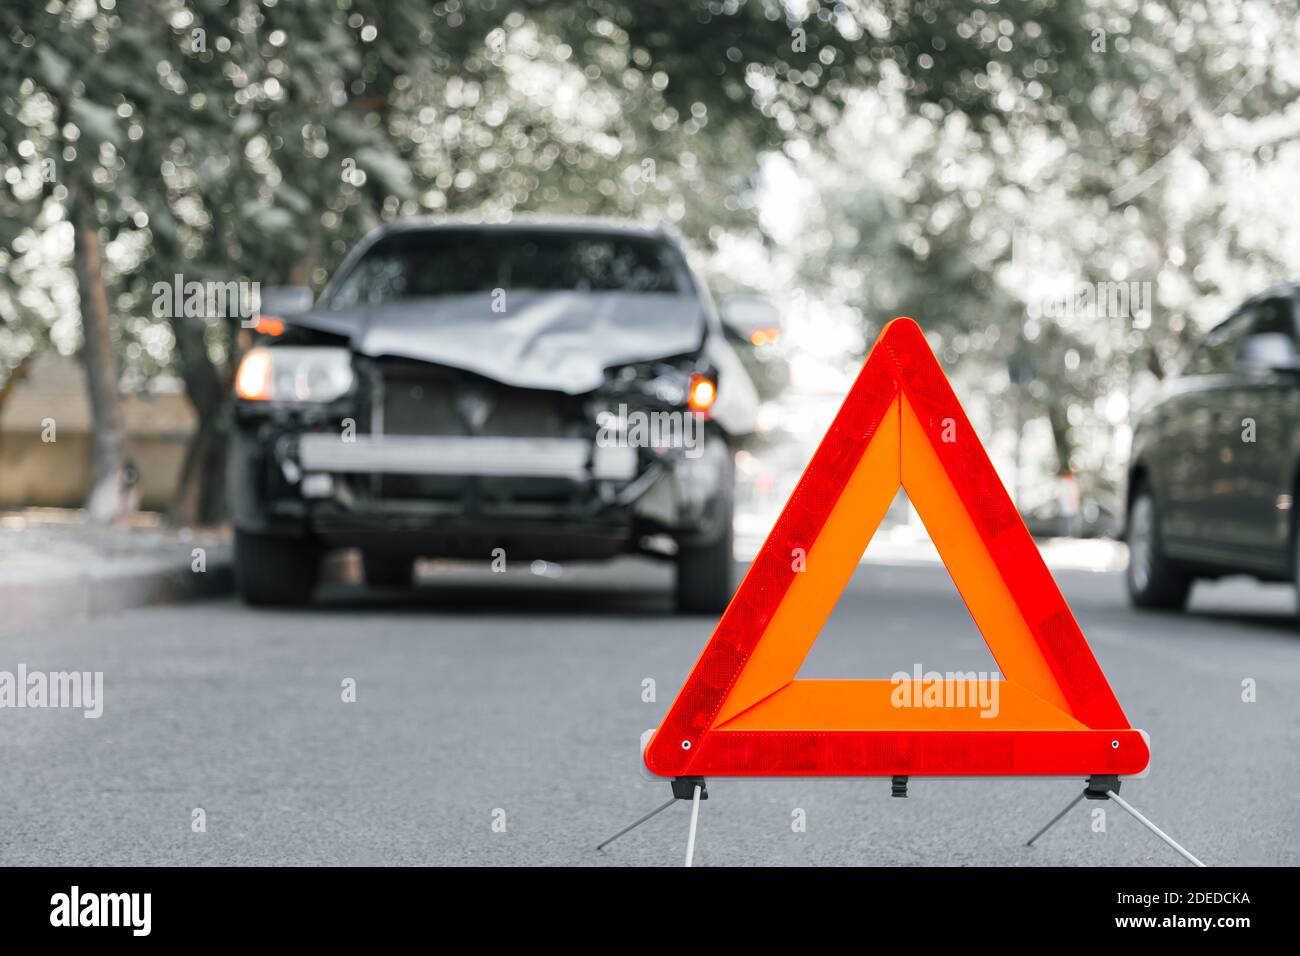 Red emergency stop triangle sign on road in car accident scene. Broken SUV car on road at traffic accident. Car crash traffic accident on city road Stock Photo